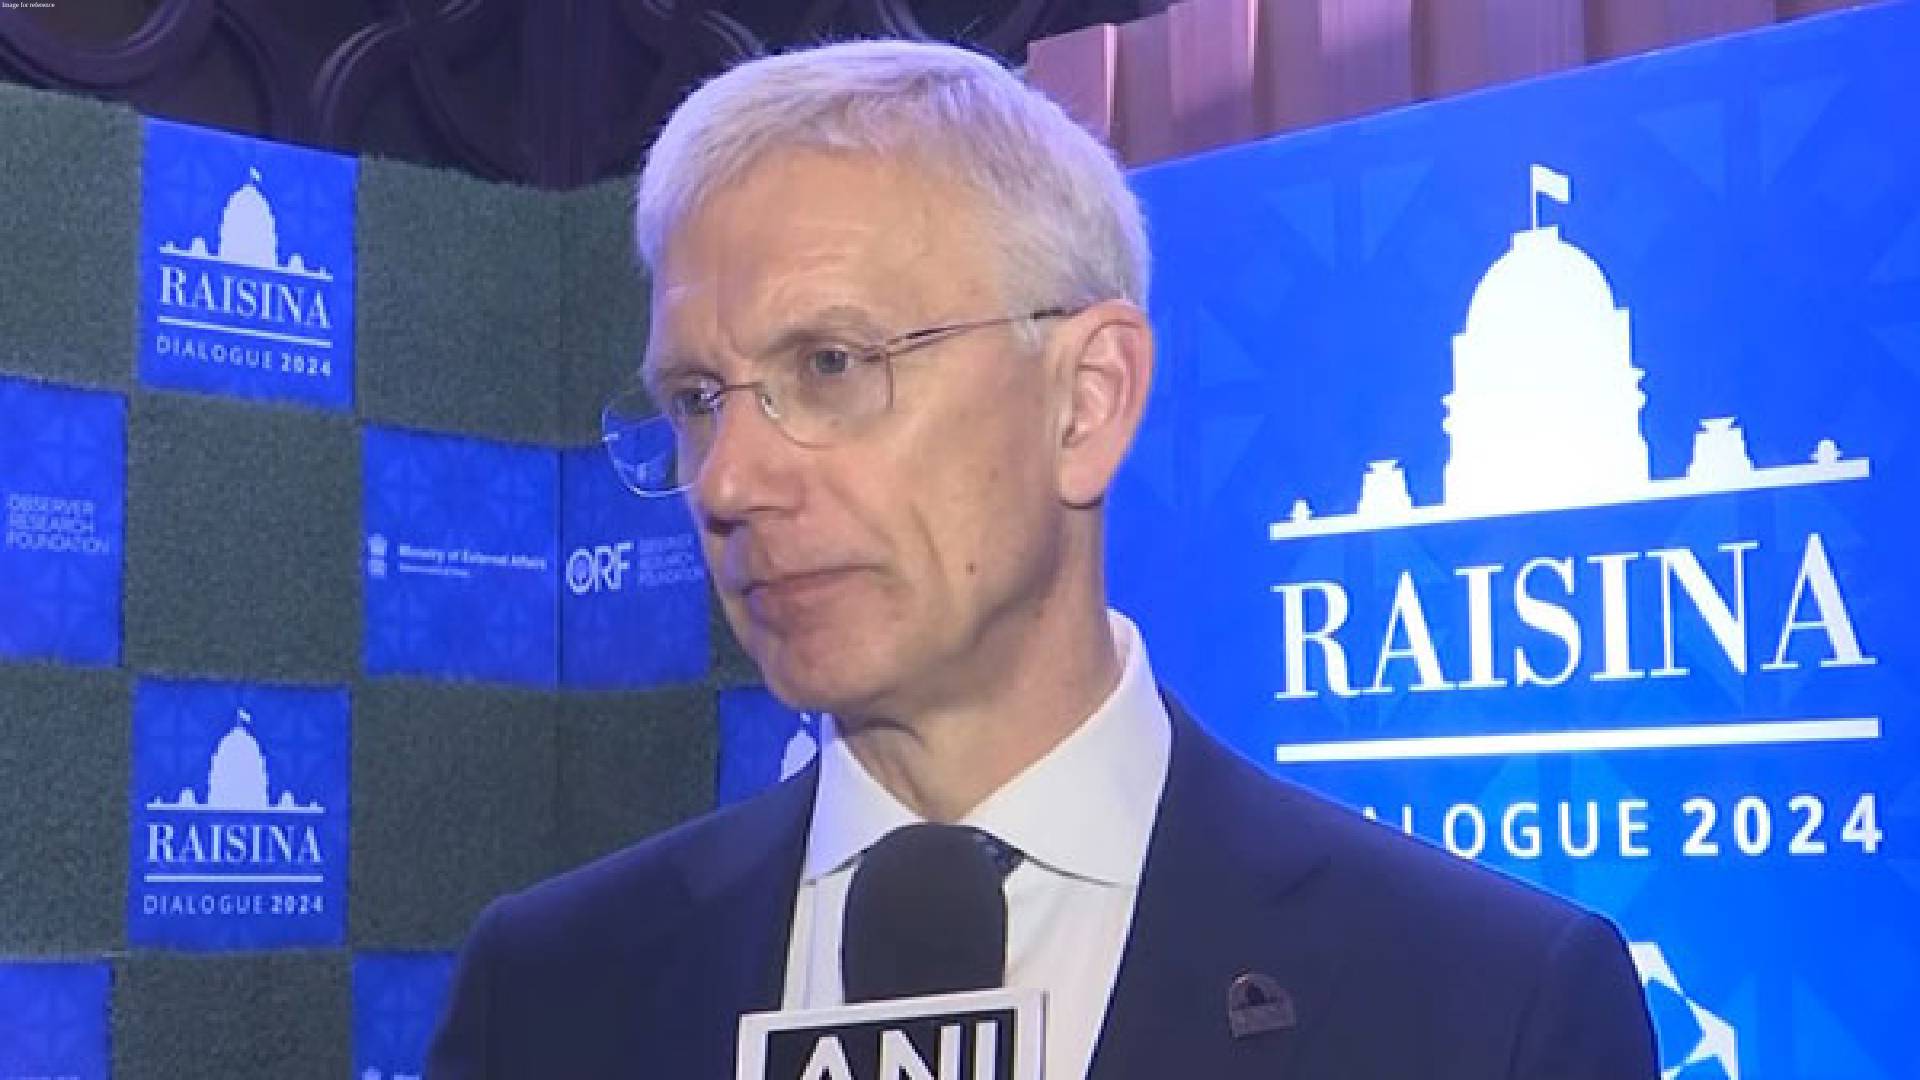 Latvia stands strong with Ukraine: Latvia Foreign Affairs Minister speaks at Raisina Dialogue 2024